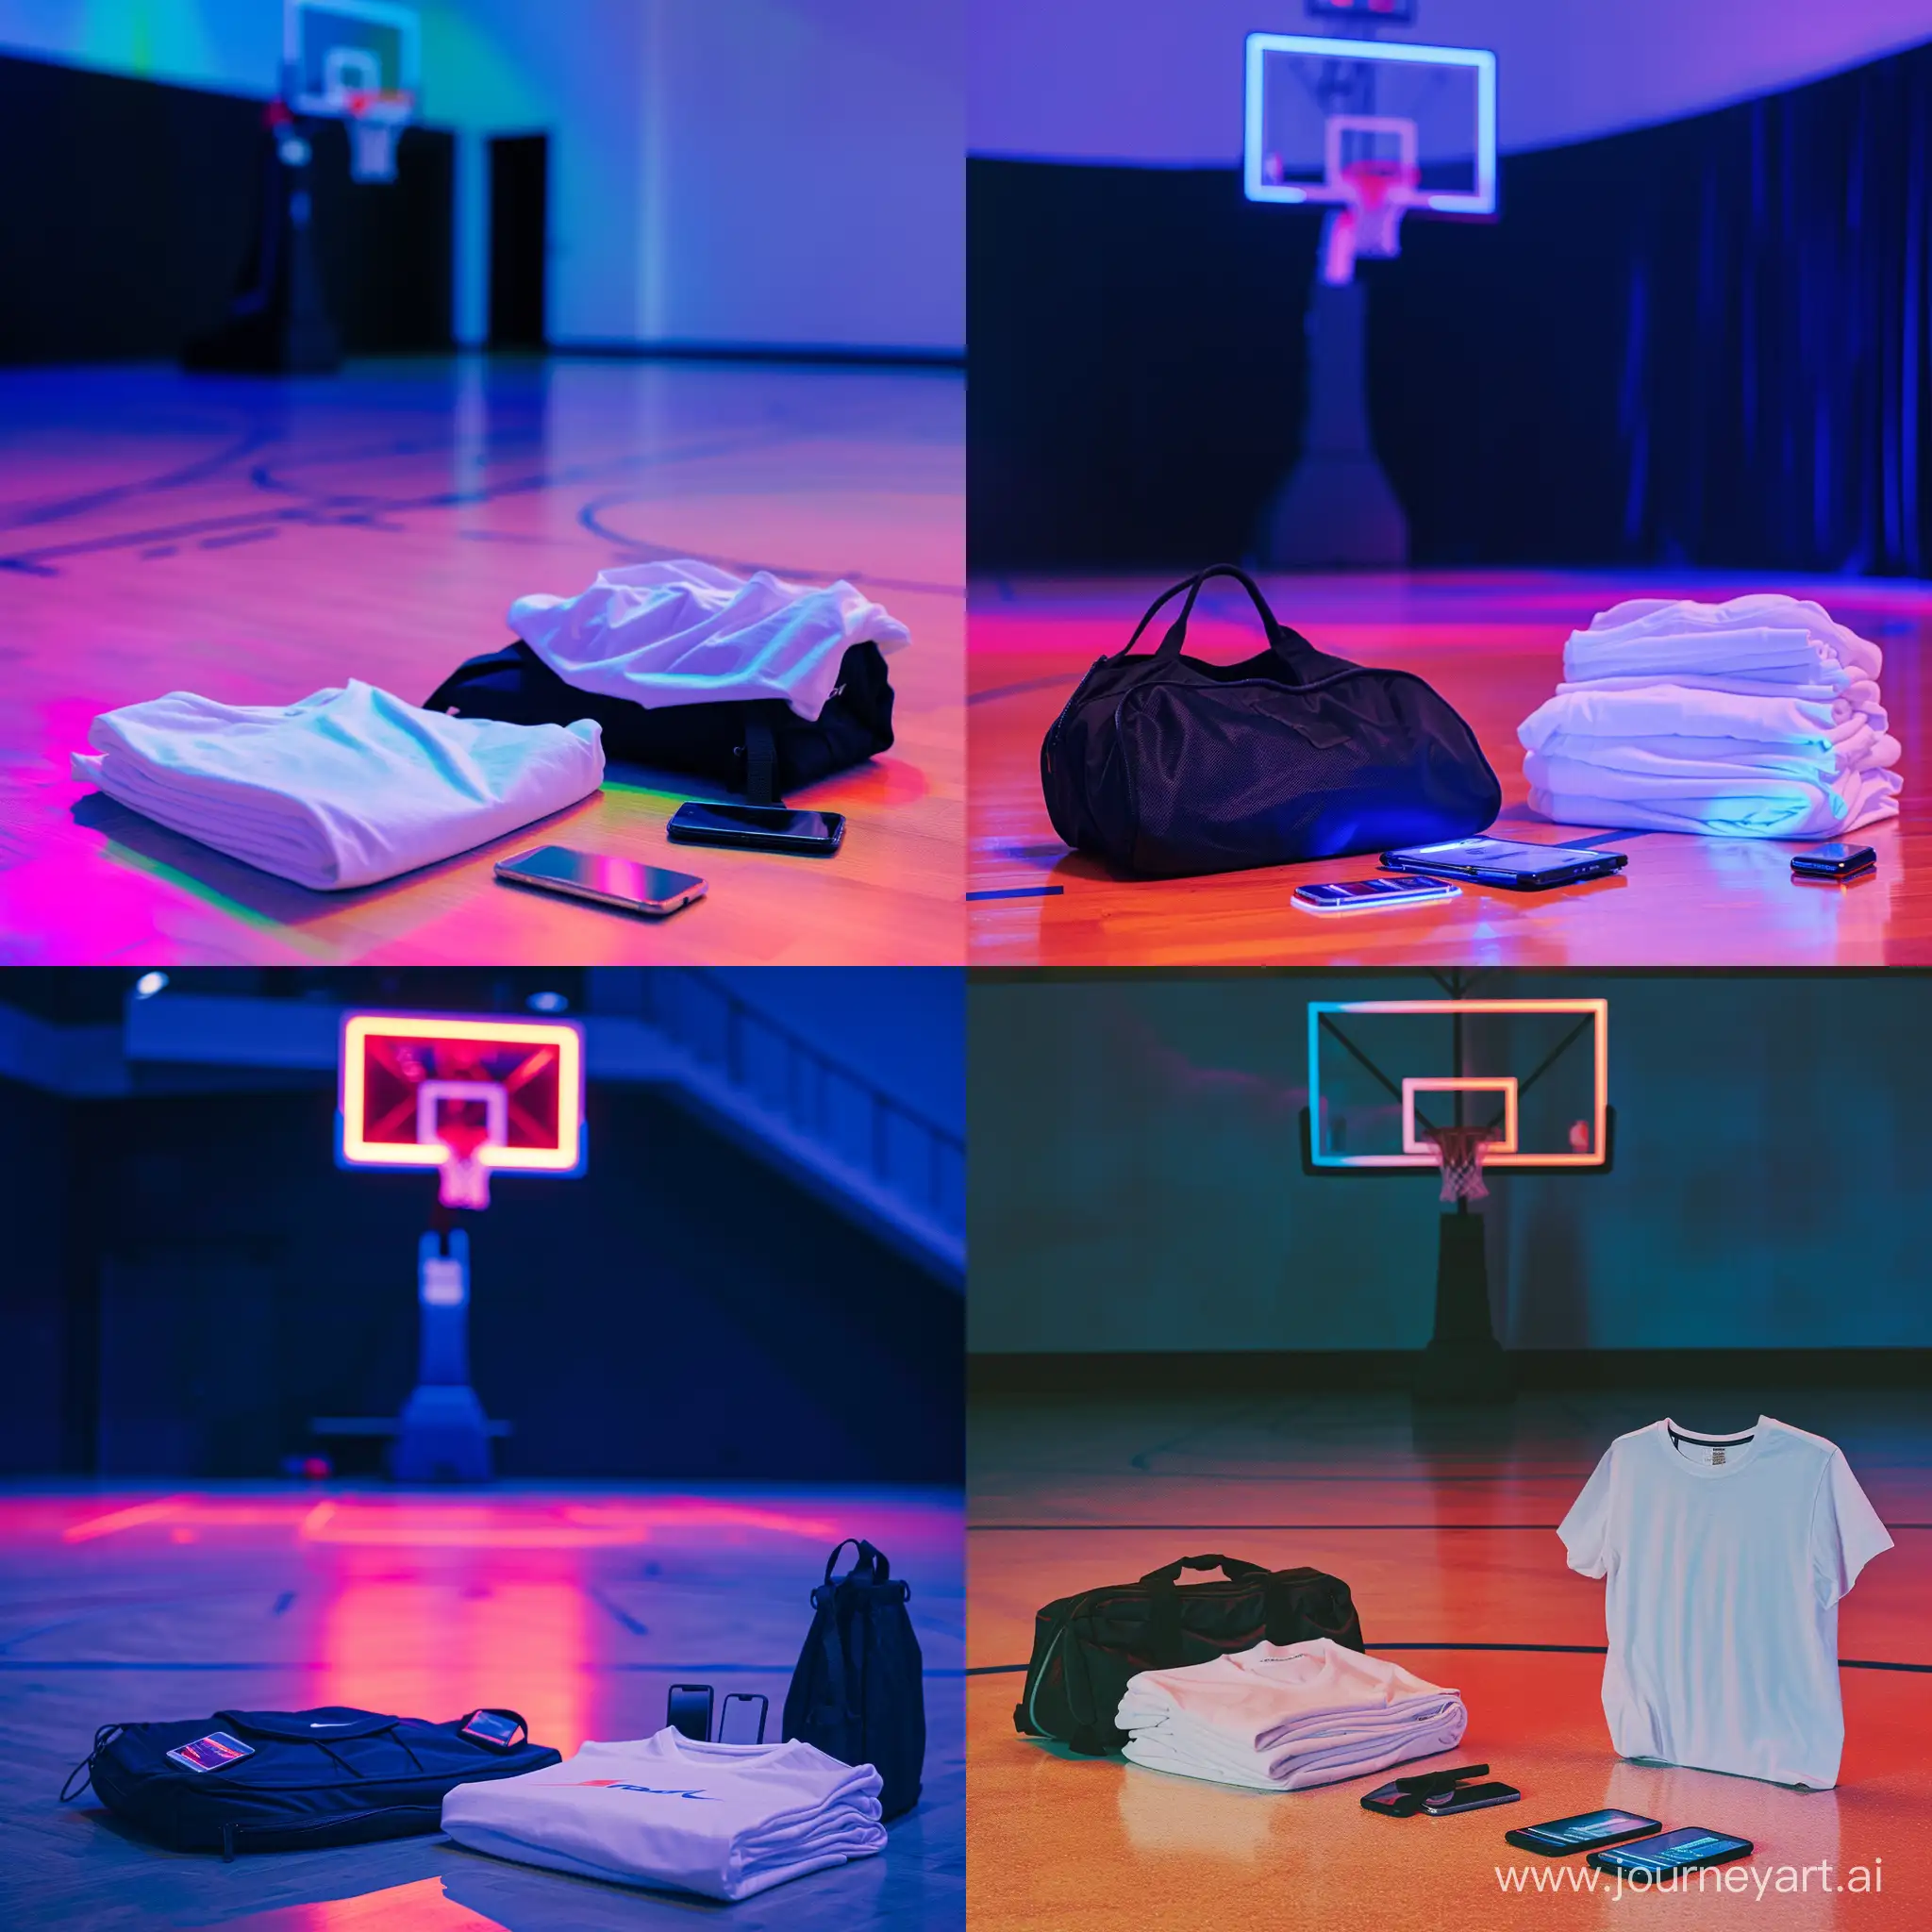 On the right side of the image folded white t-shirt, mobile phones and black sports bag on a basketball court. Basketball hoop in the background. All in neon colors. Image is from the distance.
